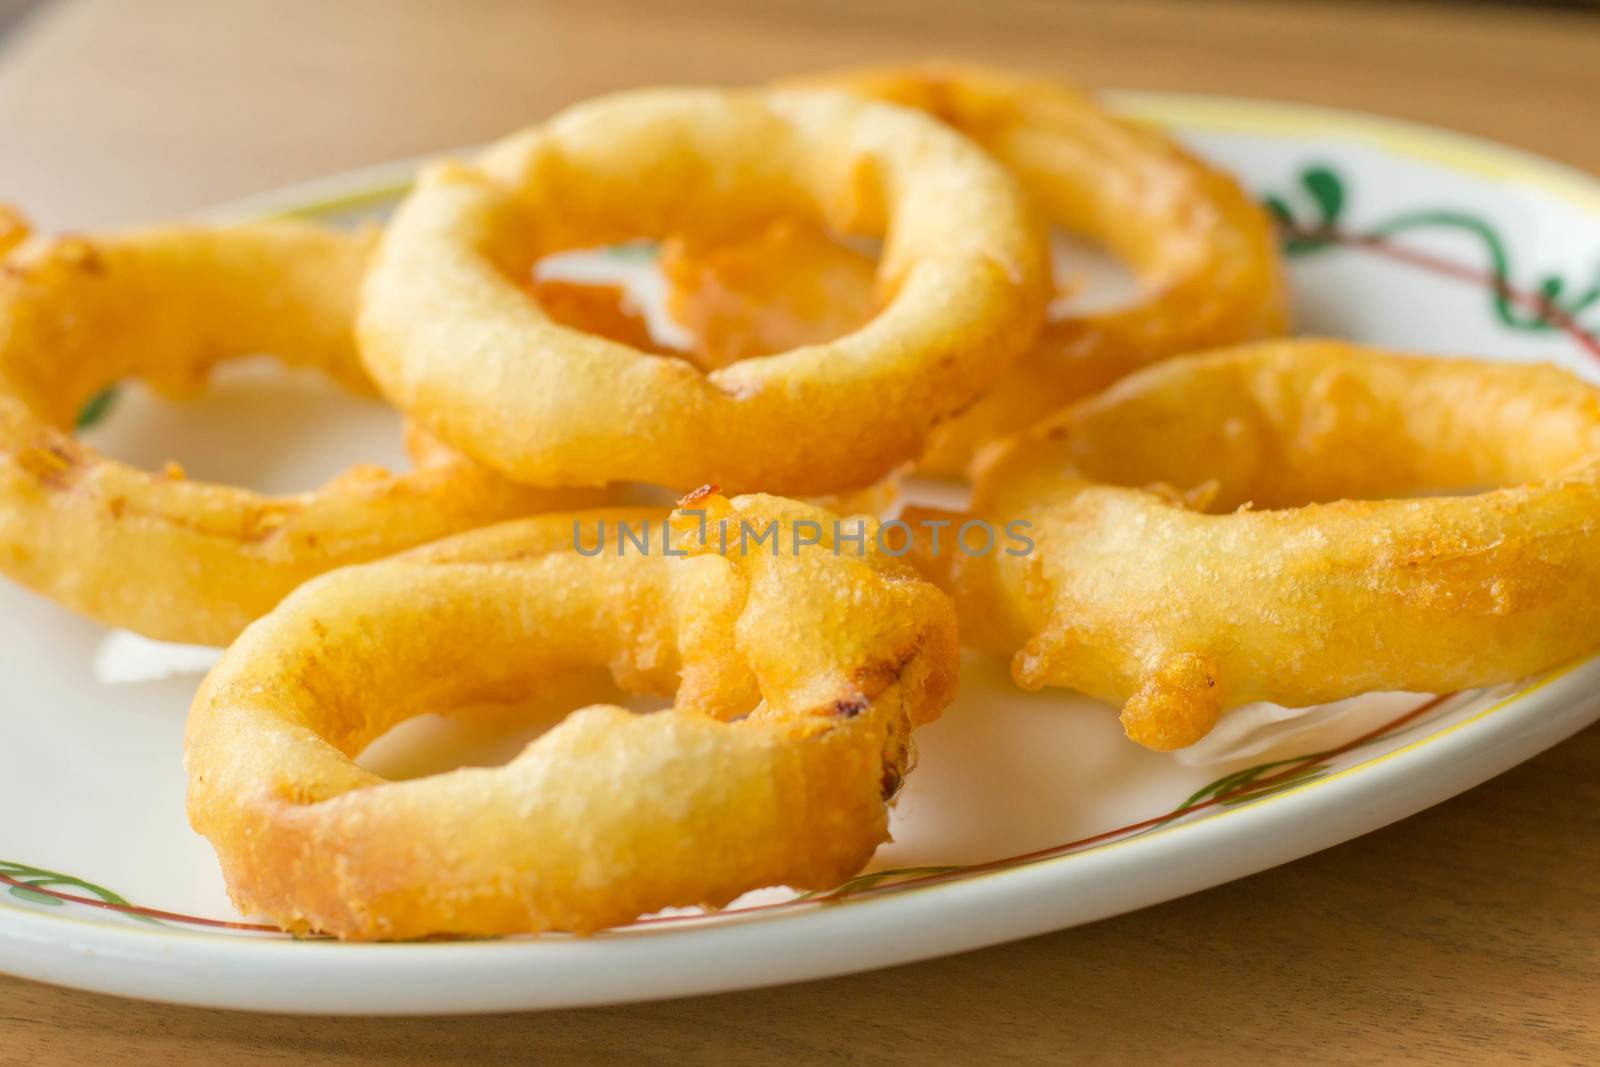 onion rings and dip sauce on the plate  by Thanamat